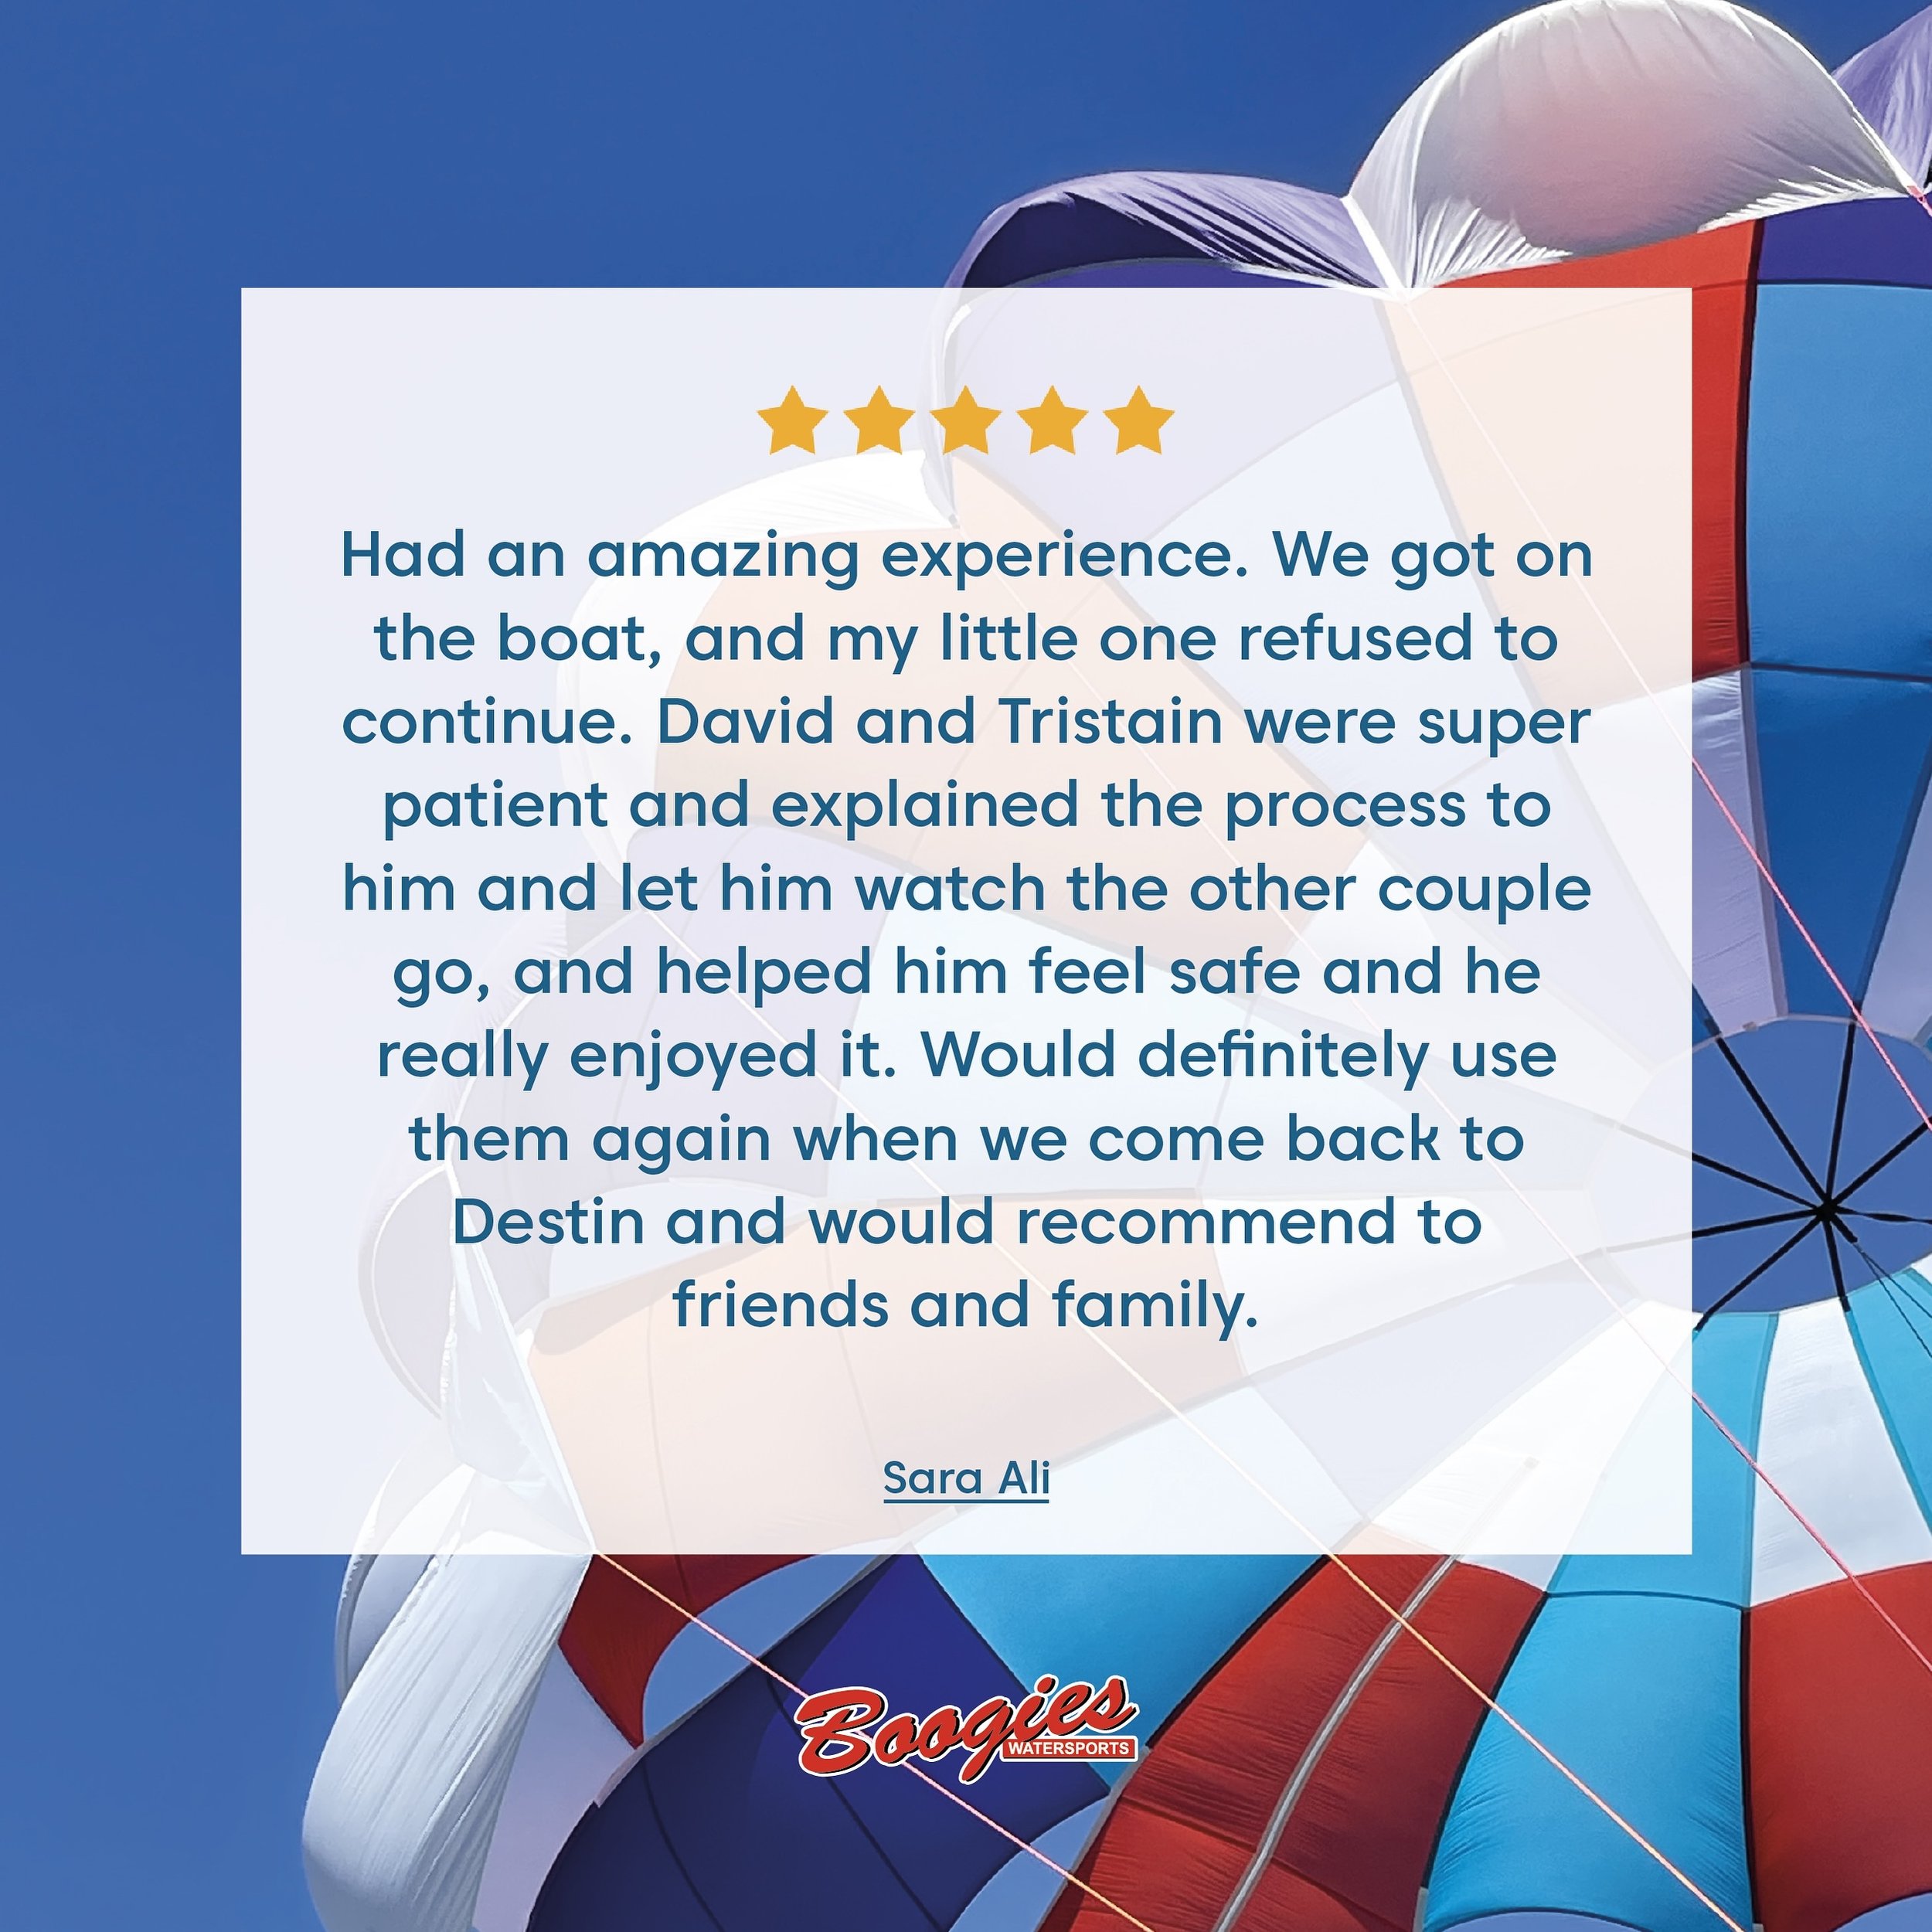 🪂✨ A huge shoutout to Sara for sharing her heartwarming parasailing experience with us, highlighting the exceptional care provided by David and Tristain! We take immense pride in ensuring every member of your family feels safe and cherished during t